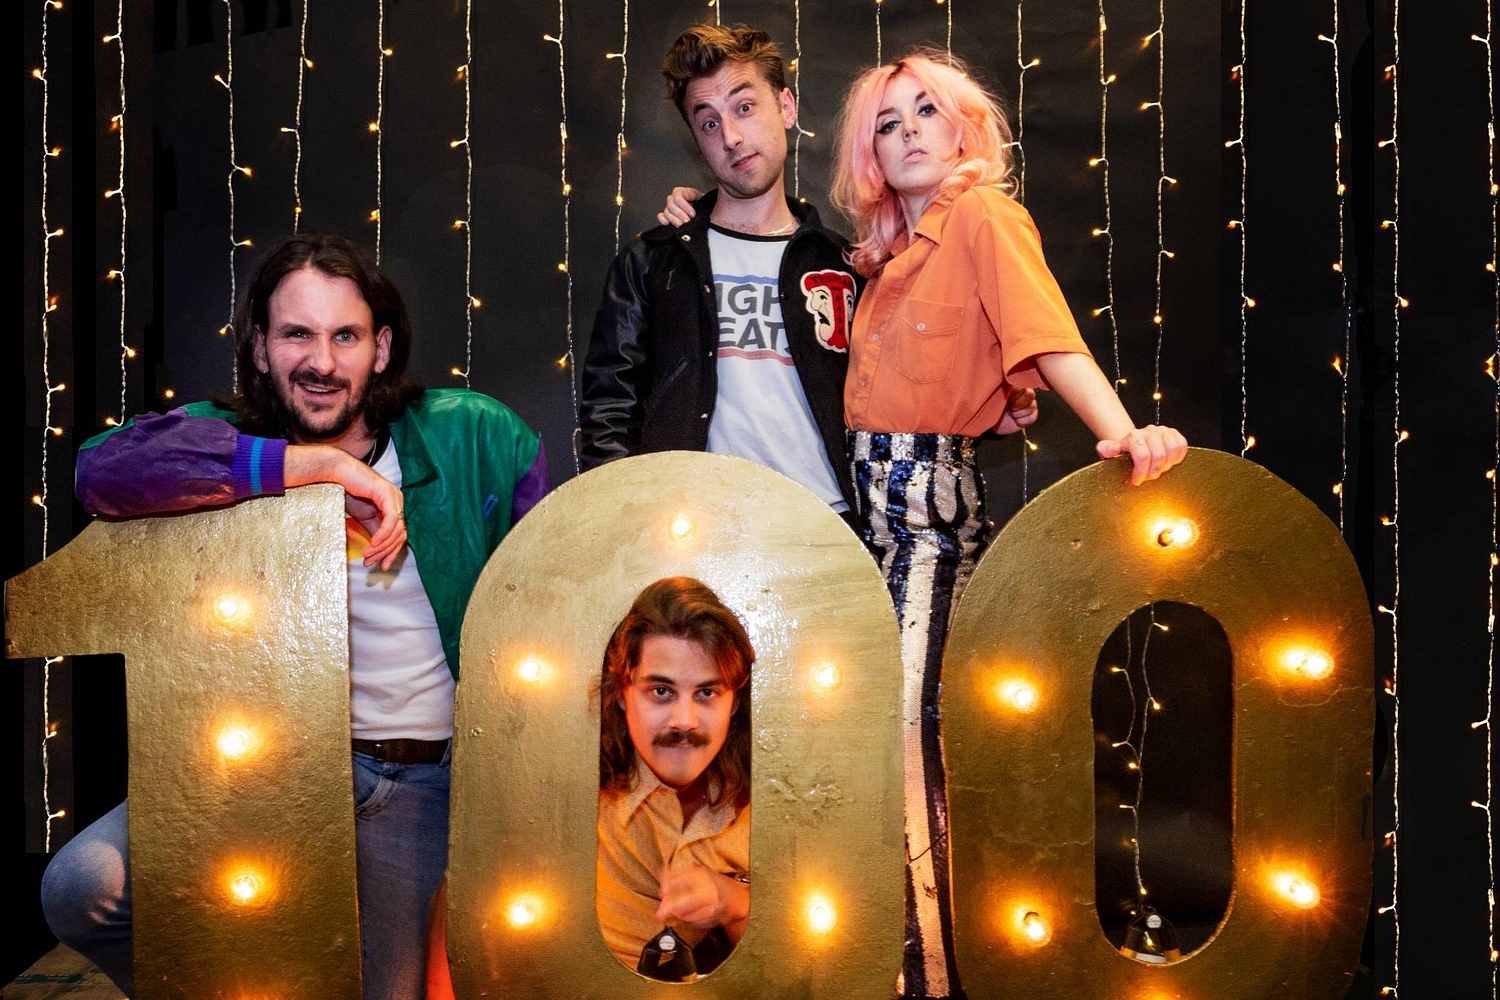 Live & Kicking: Looking back on DIY's 100th celebrations